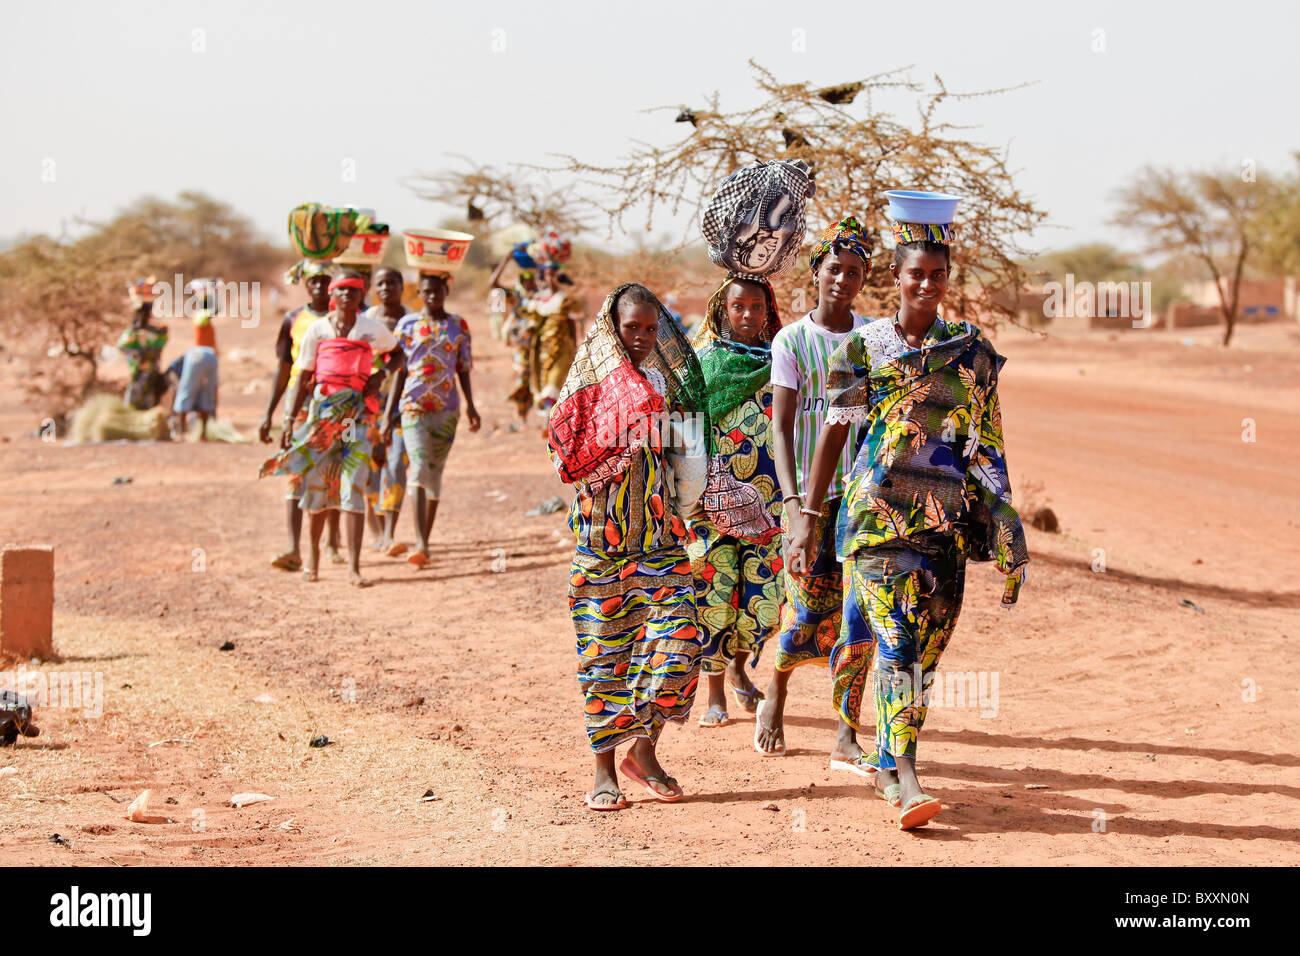 Women arrive in the town of Djibo, Burkina Faso, on foot, carrying their wares on their heads in traditional African fashion. Stock Photo